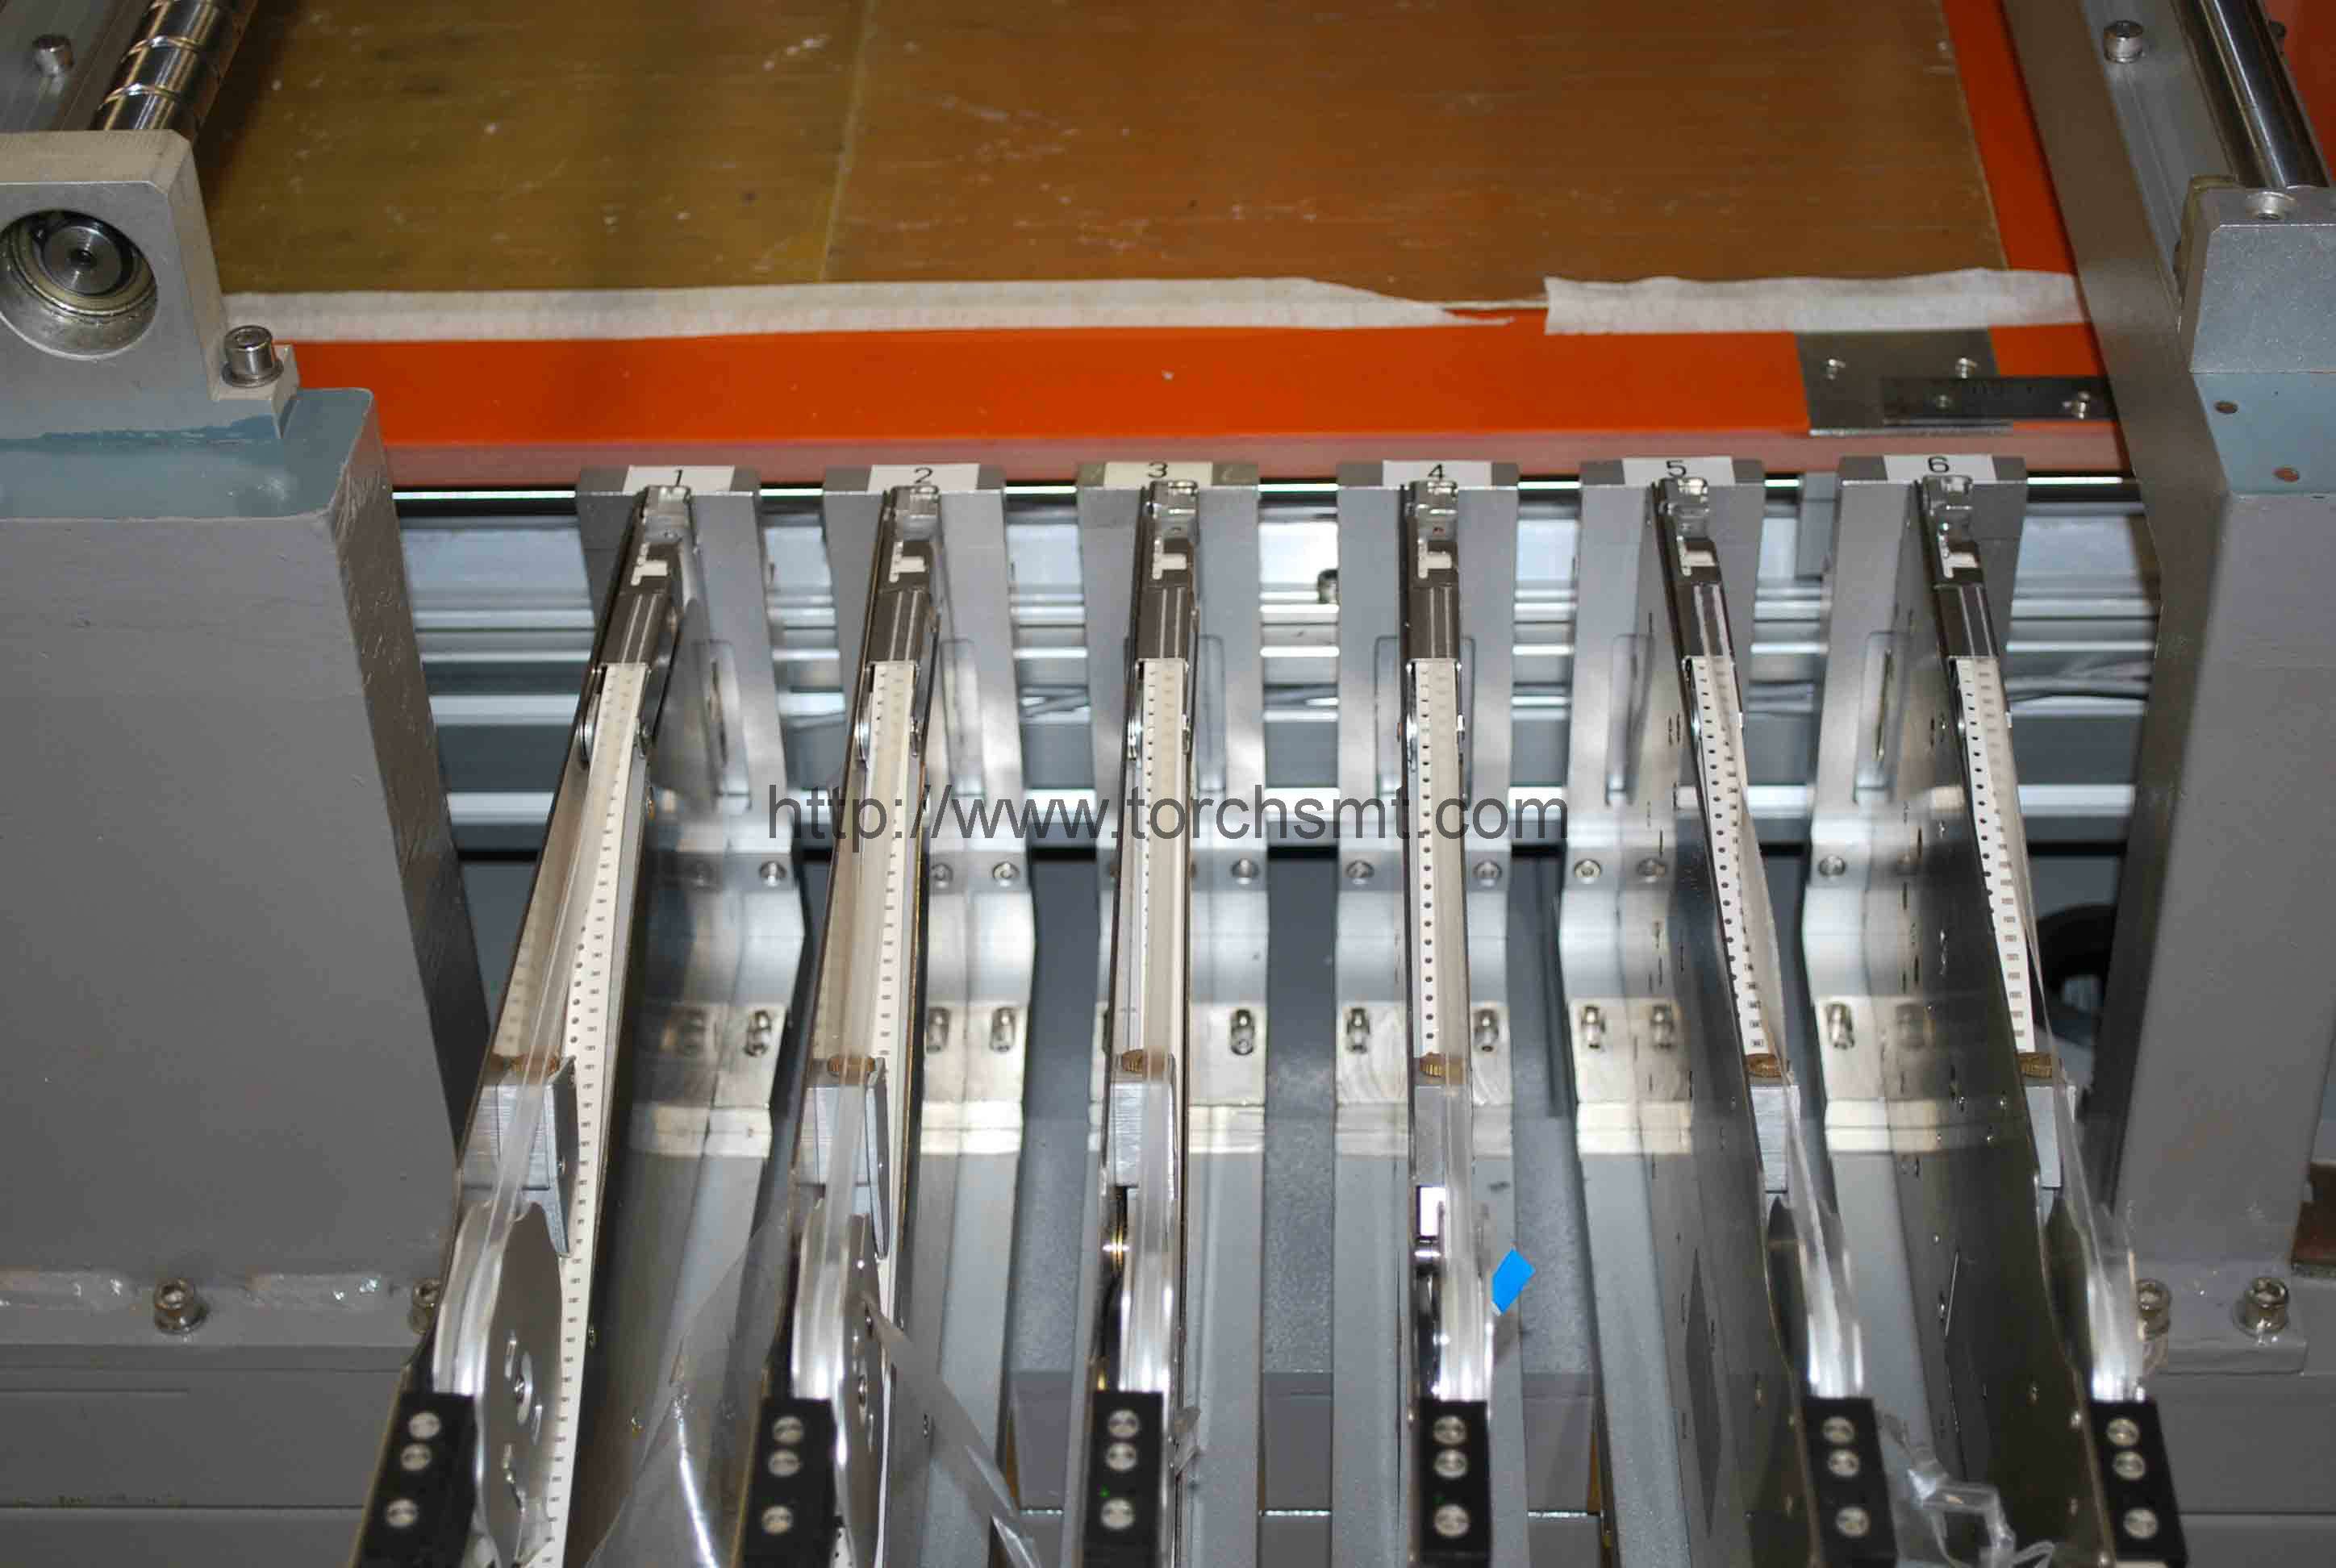 LED-automatisches Chip Mounter LED660